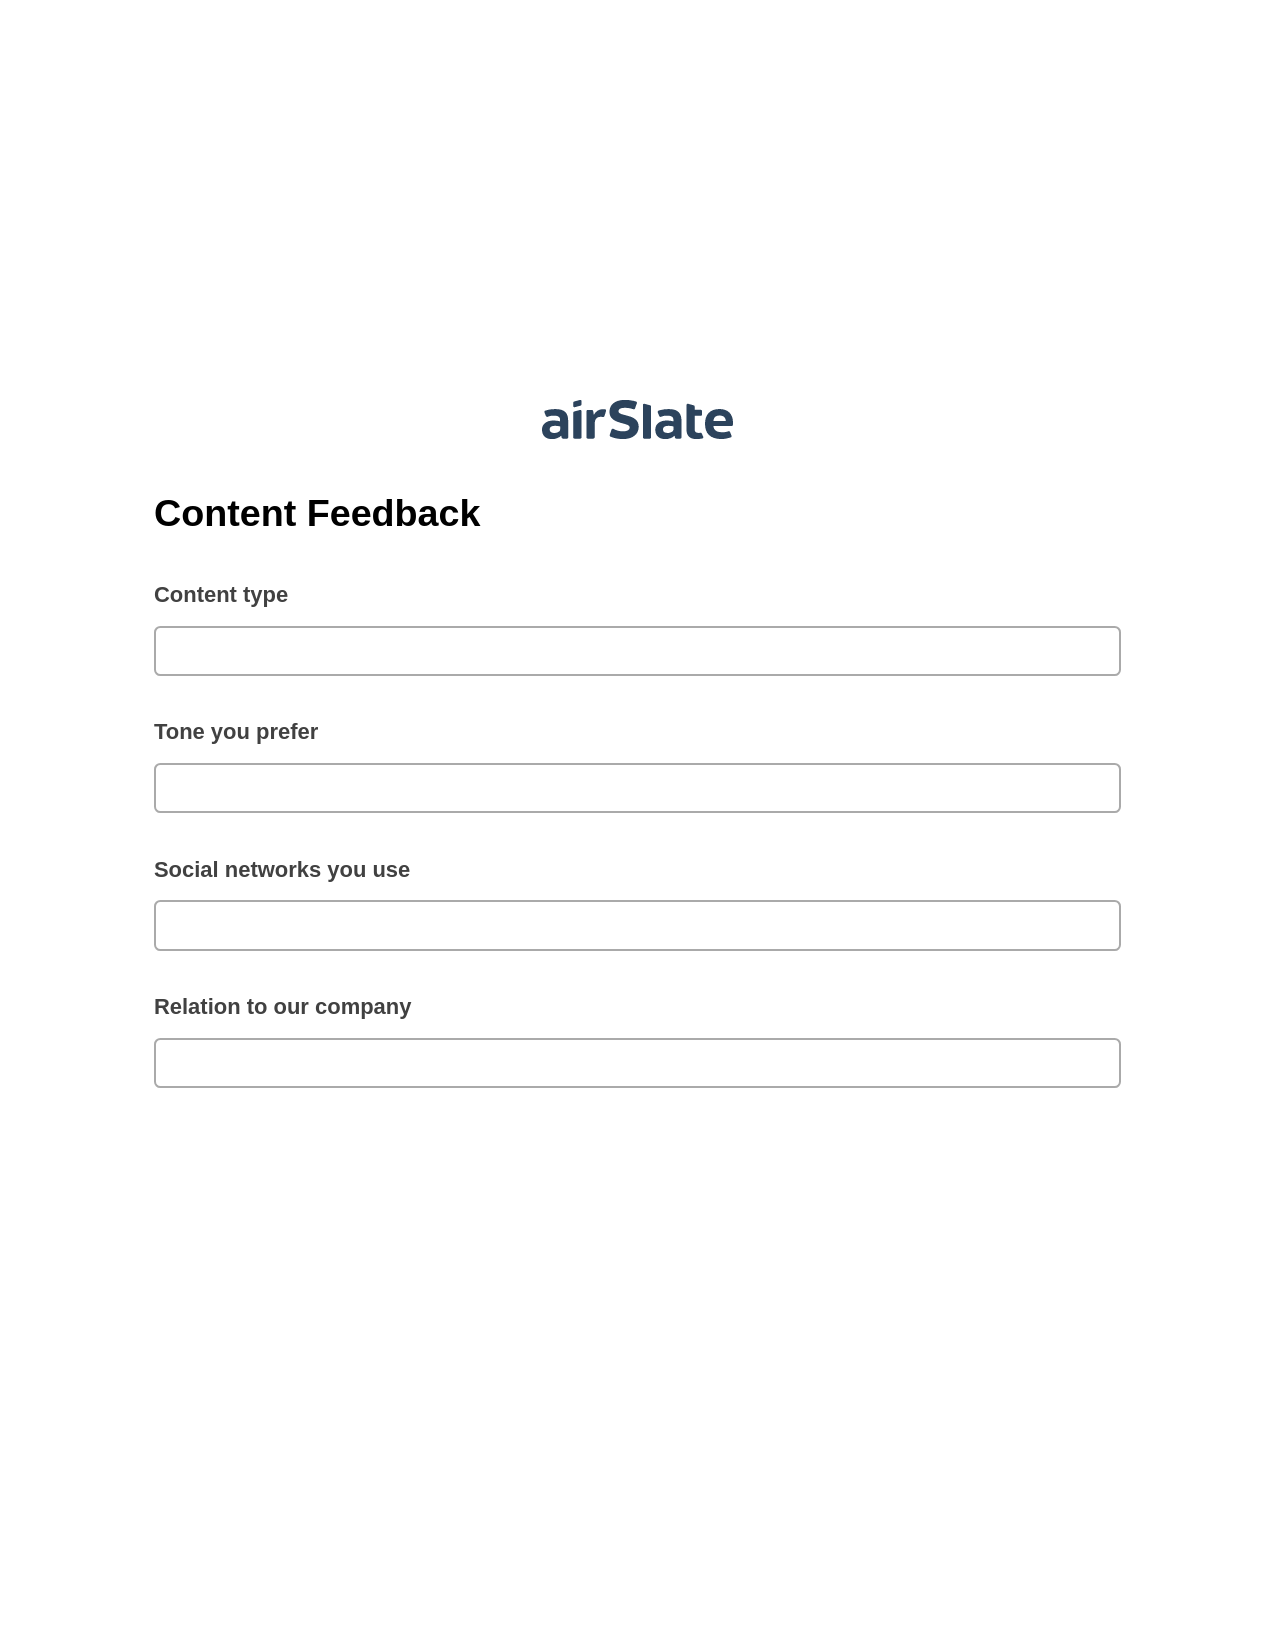 Content Feedback Pre-fill from Google Sheets Bot, Remove Tags From Slate Bot, Export to Smartsheet